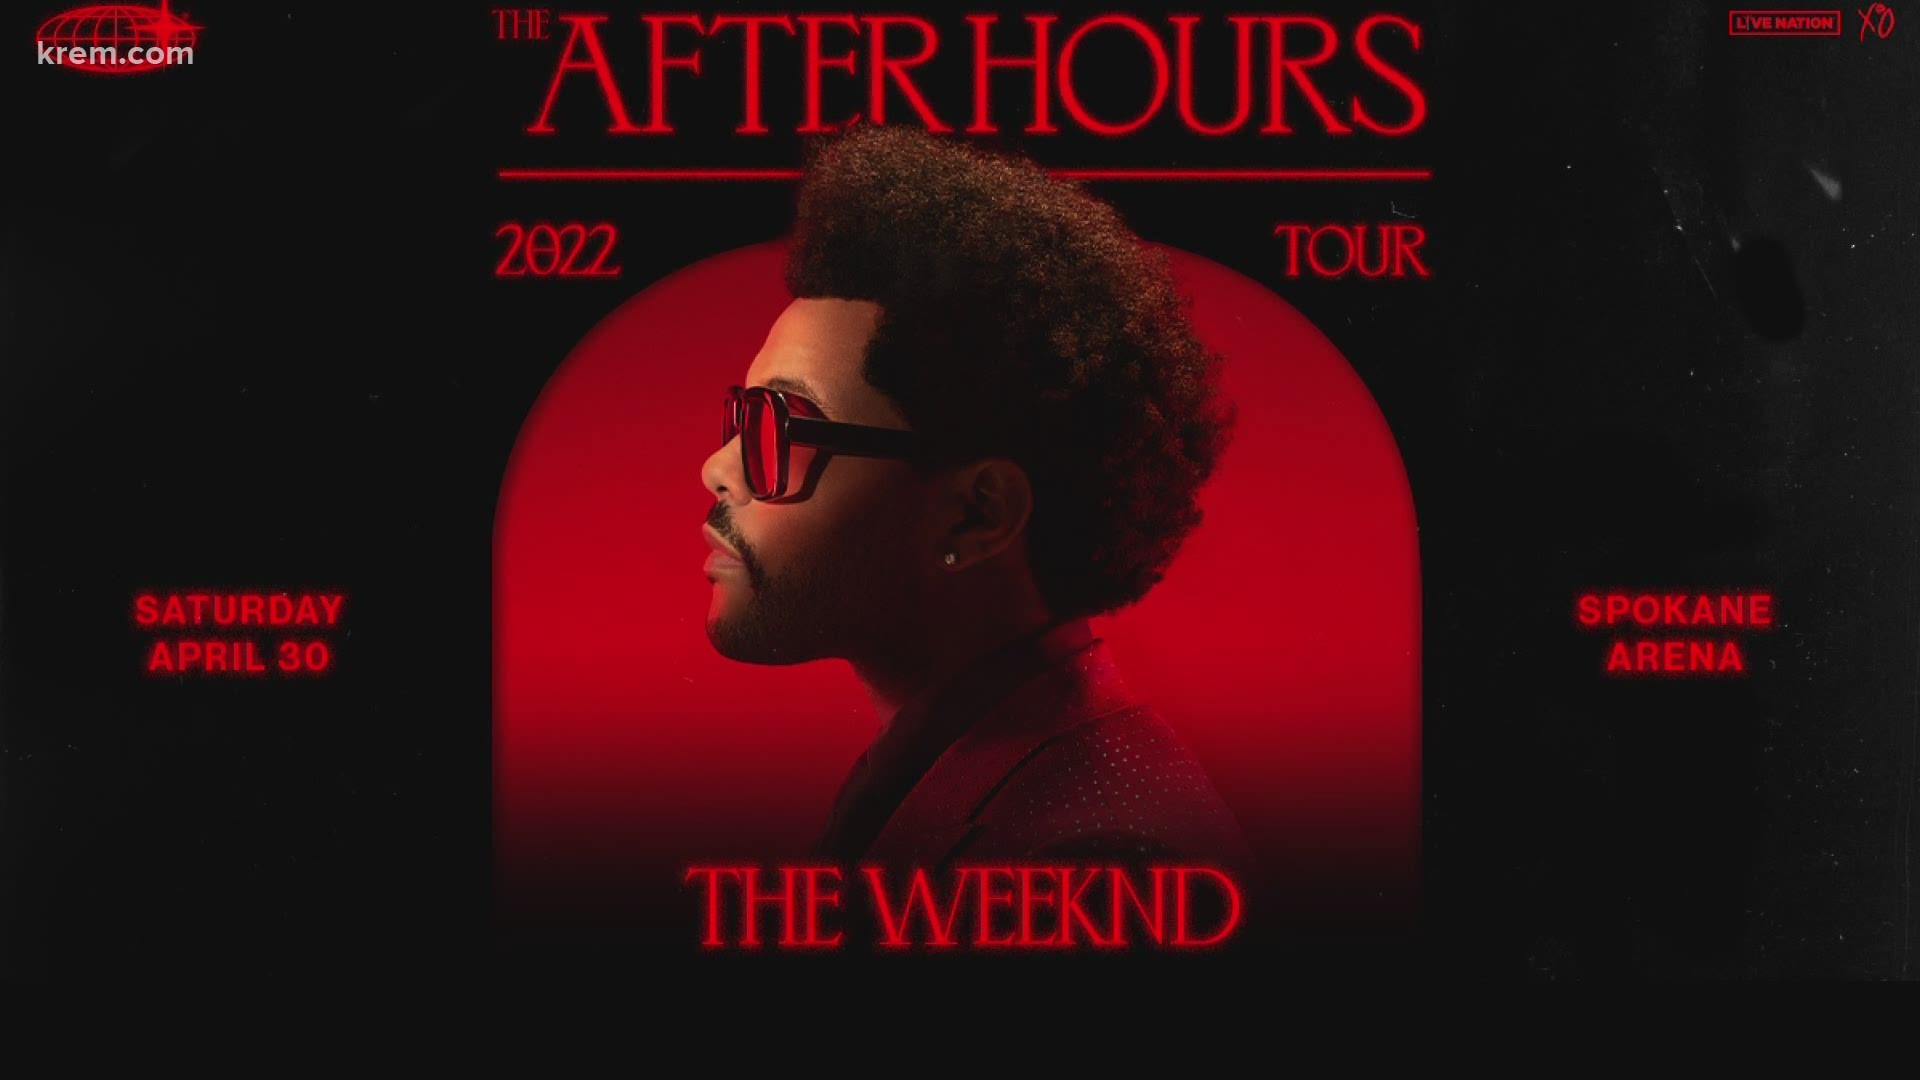 The Weeknd is stopping at the arena on his world tour on April 30, 2022.